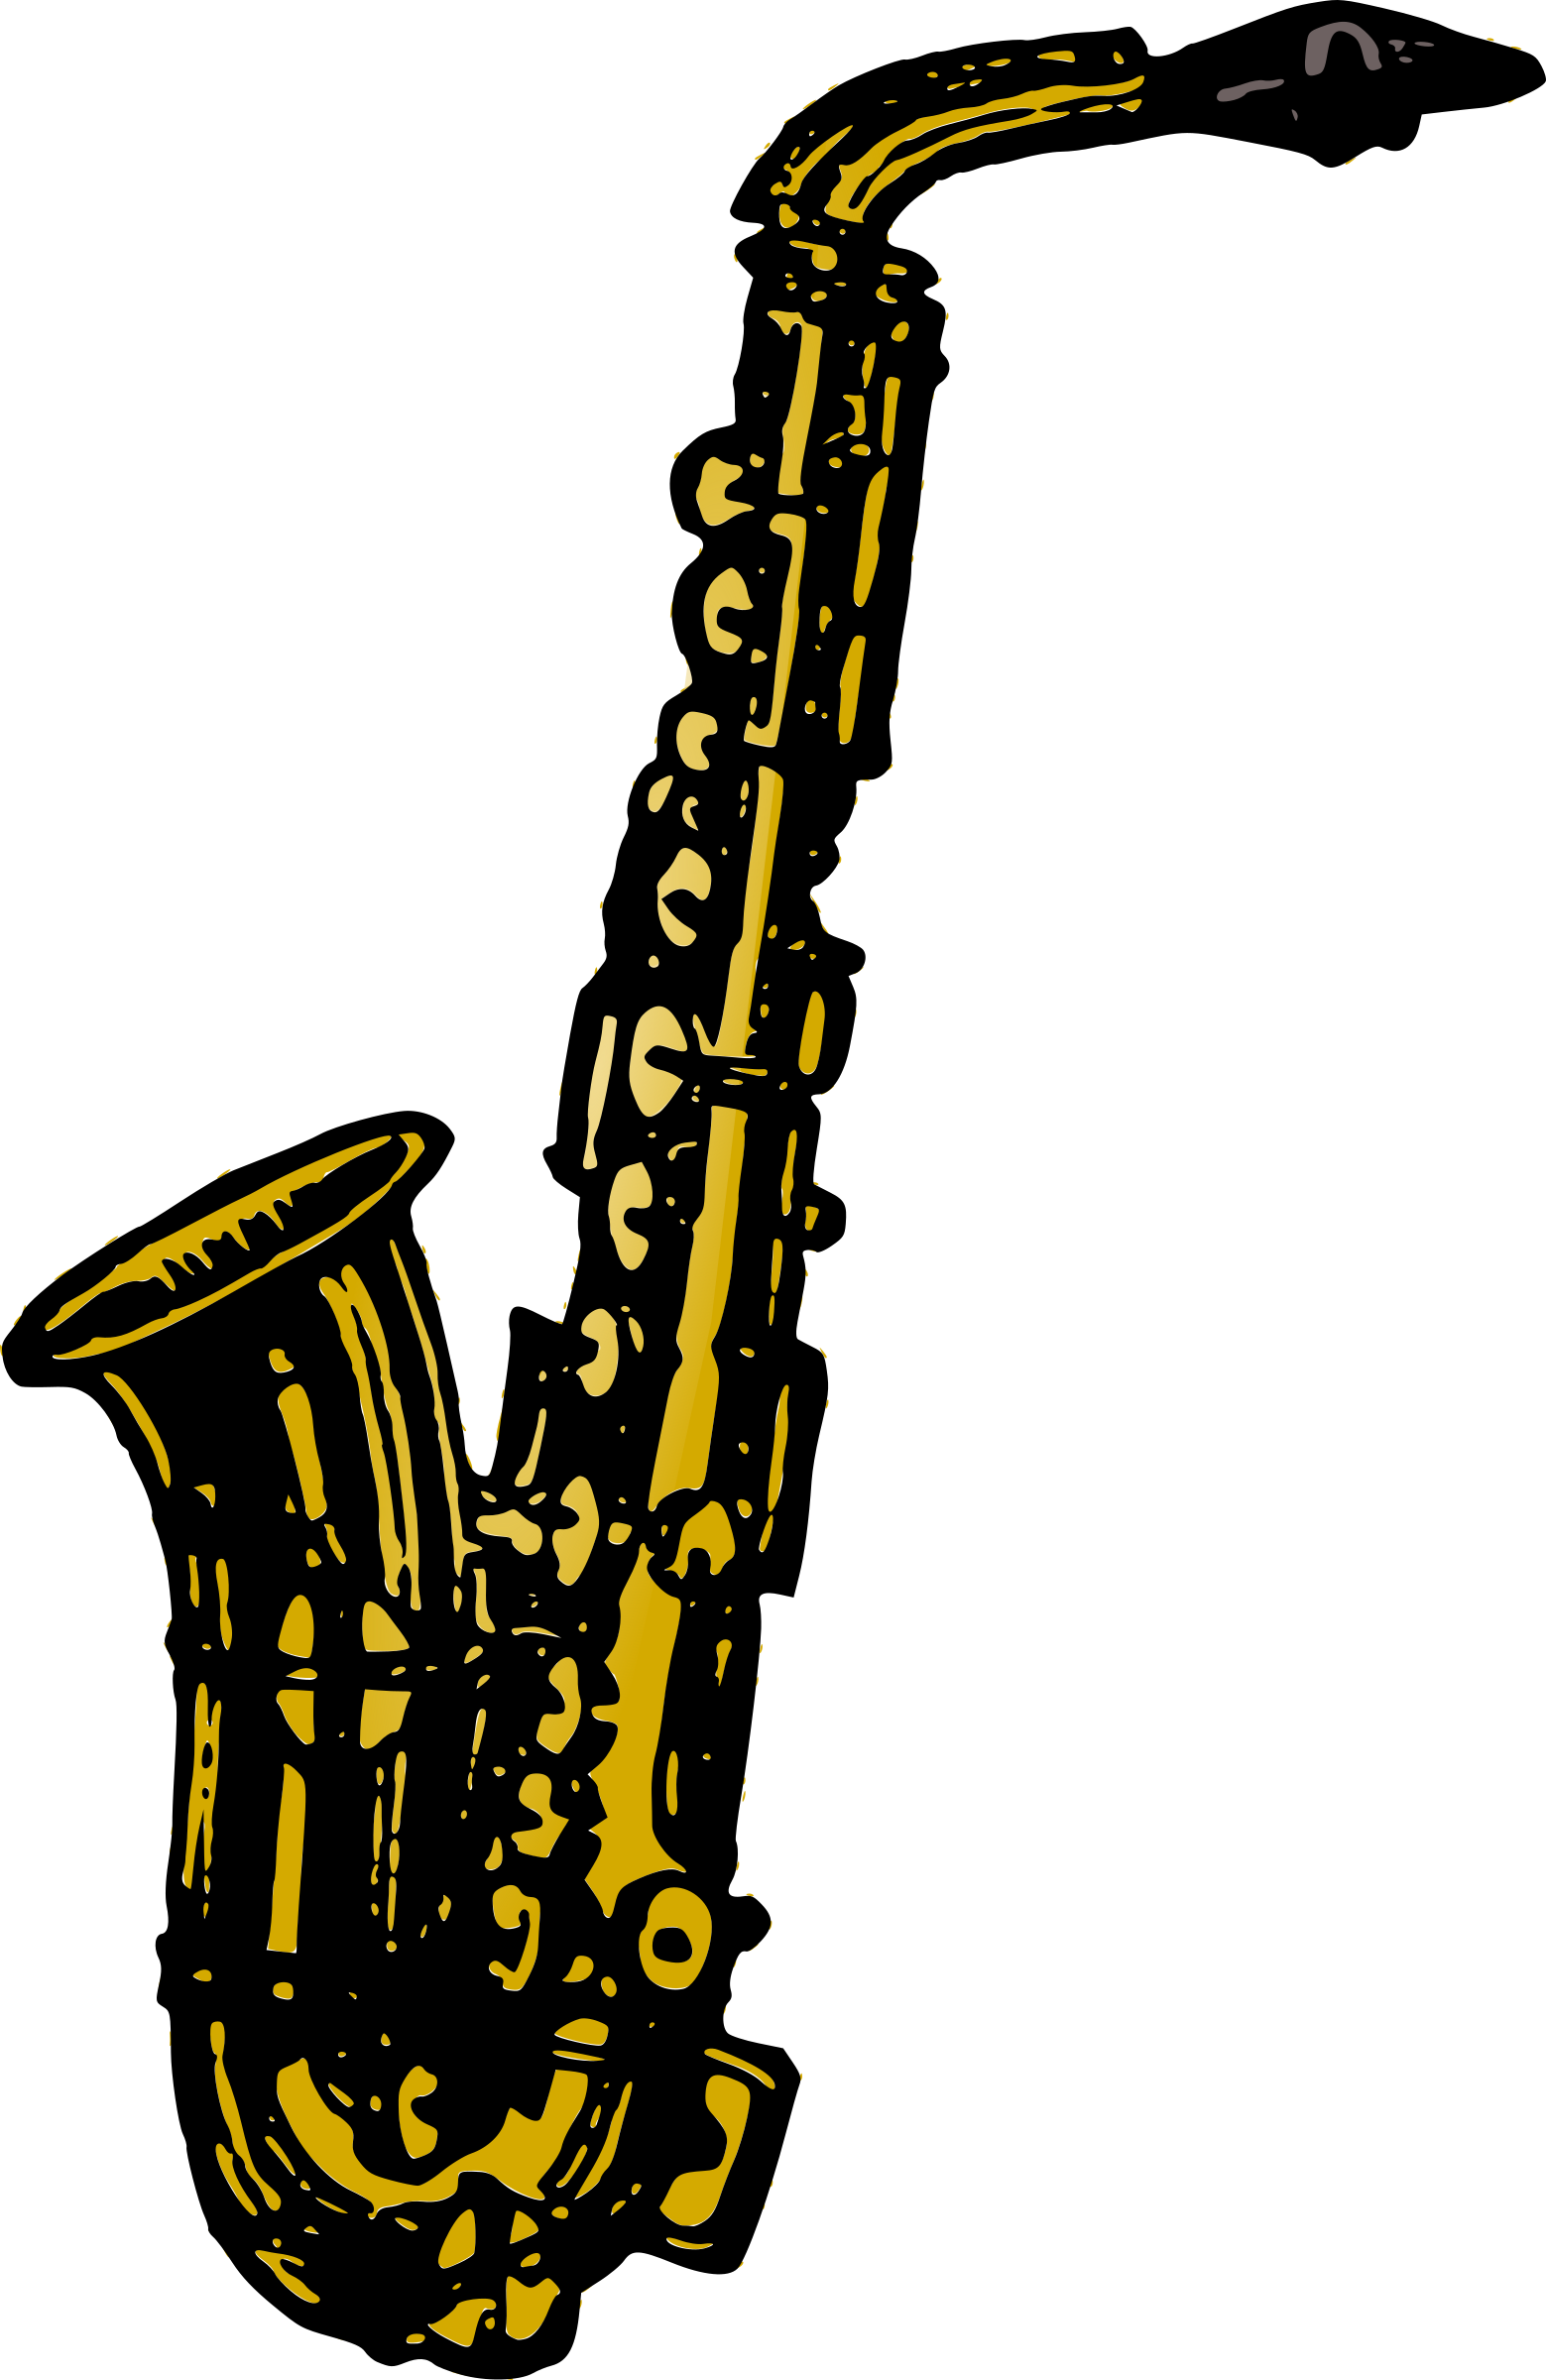 Criminal clipart smooth criminal. Saxophone small free on